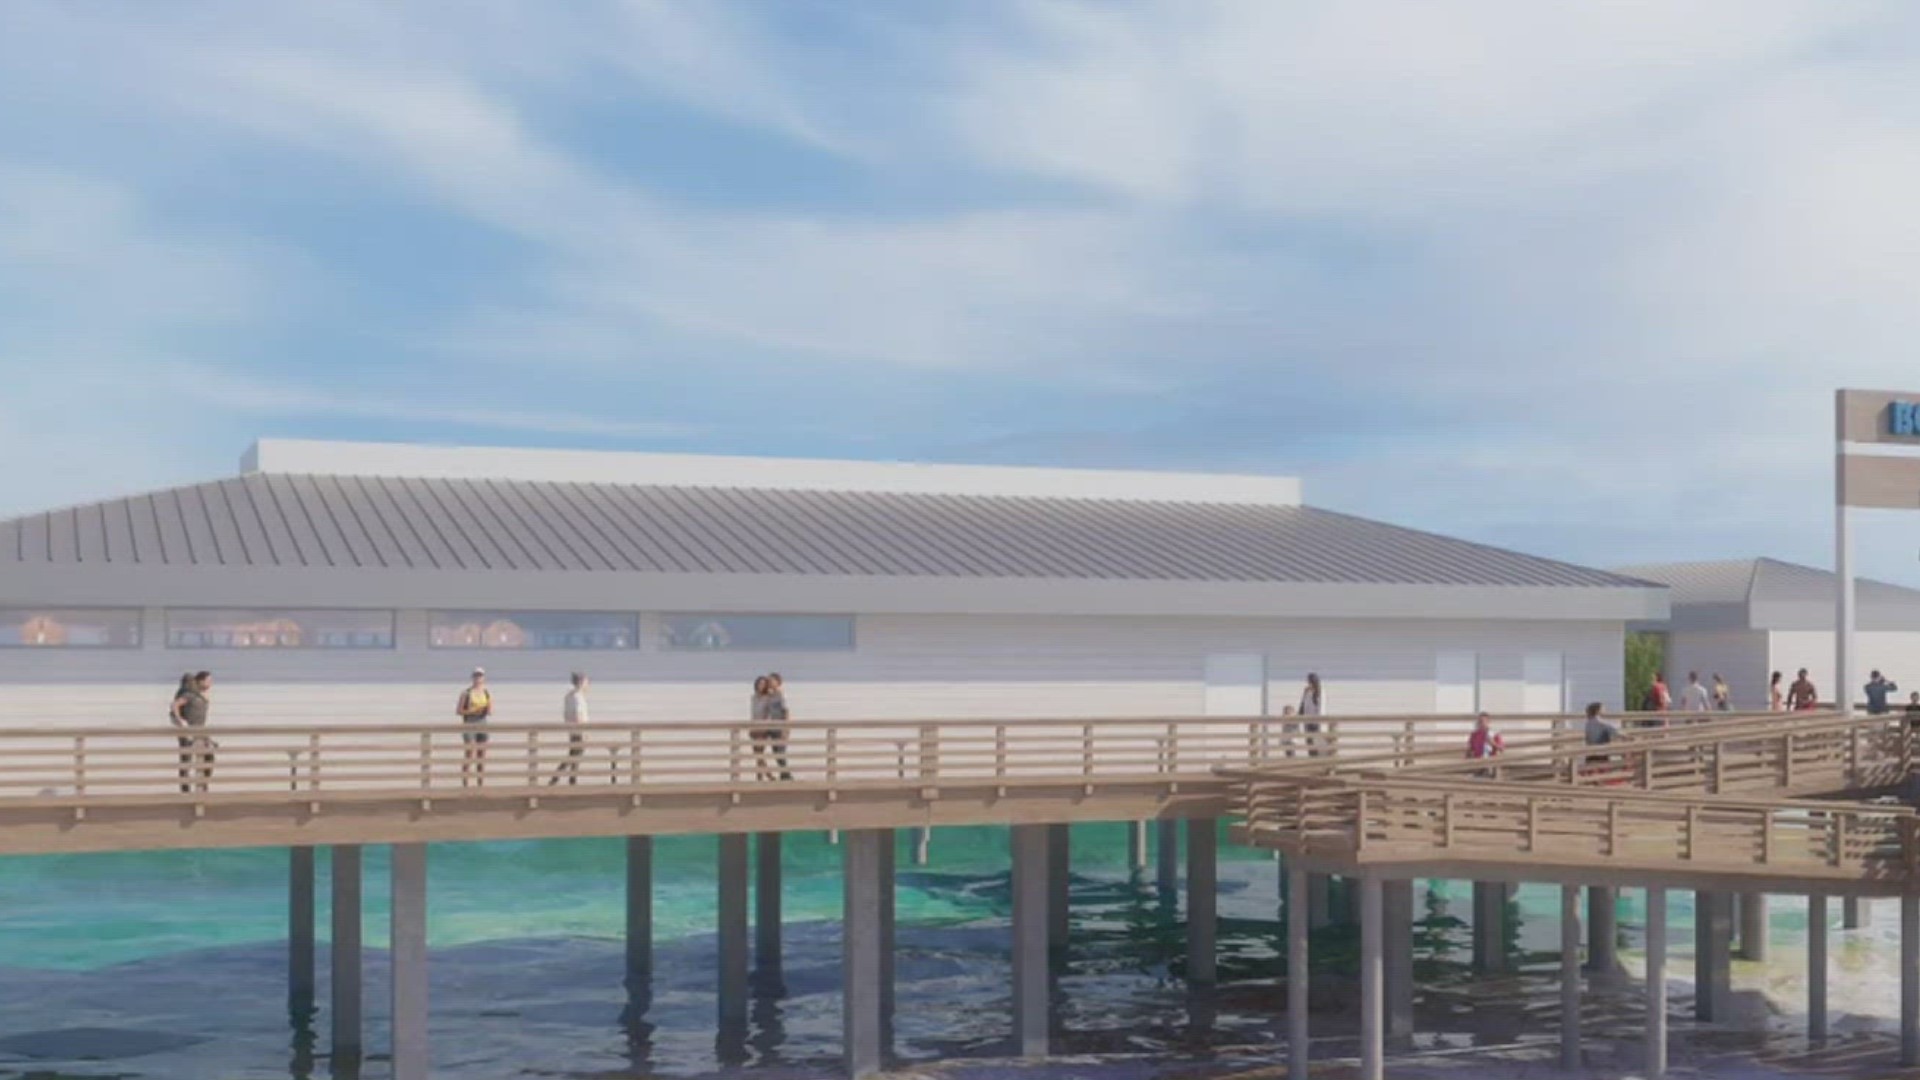 Another insurable idea would be to build restaurant space at the Briscoe King Pavillion just north of the pier.